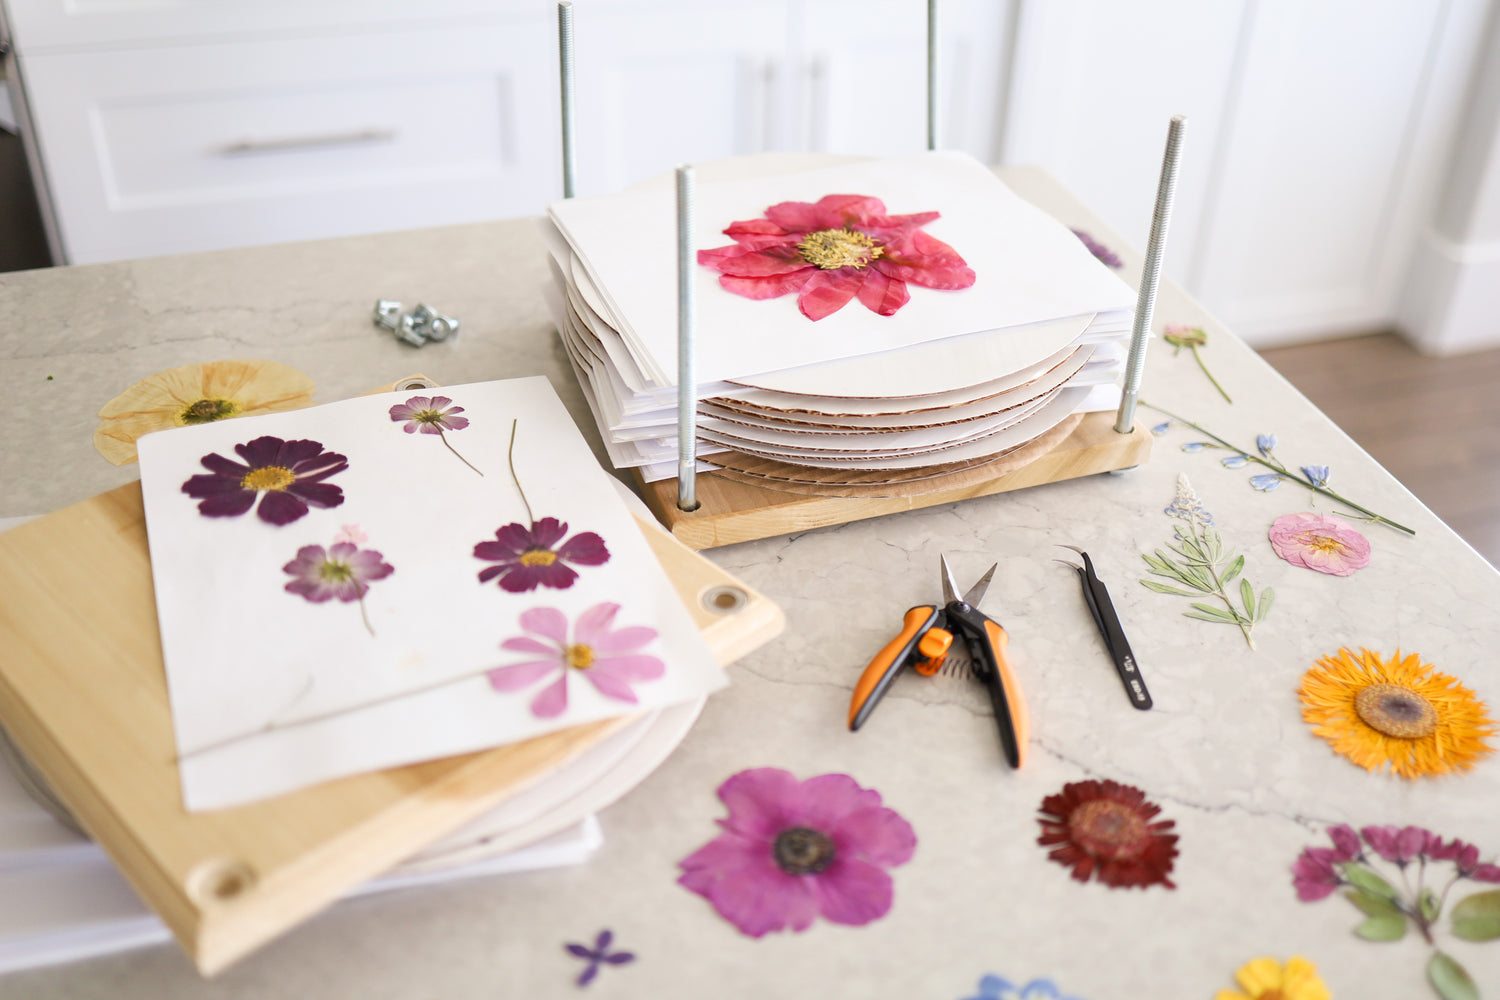 Paint with Pressed Florals Workshop